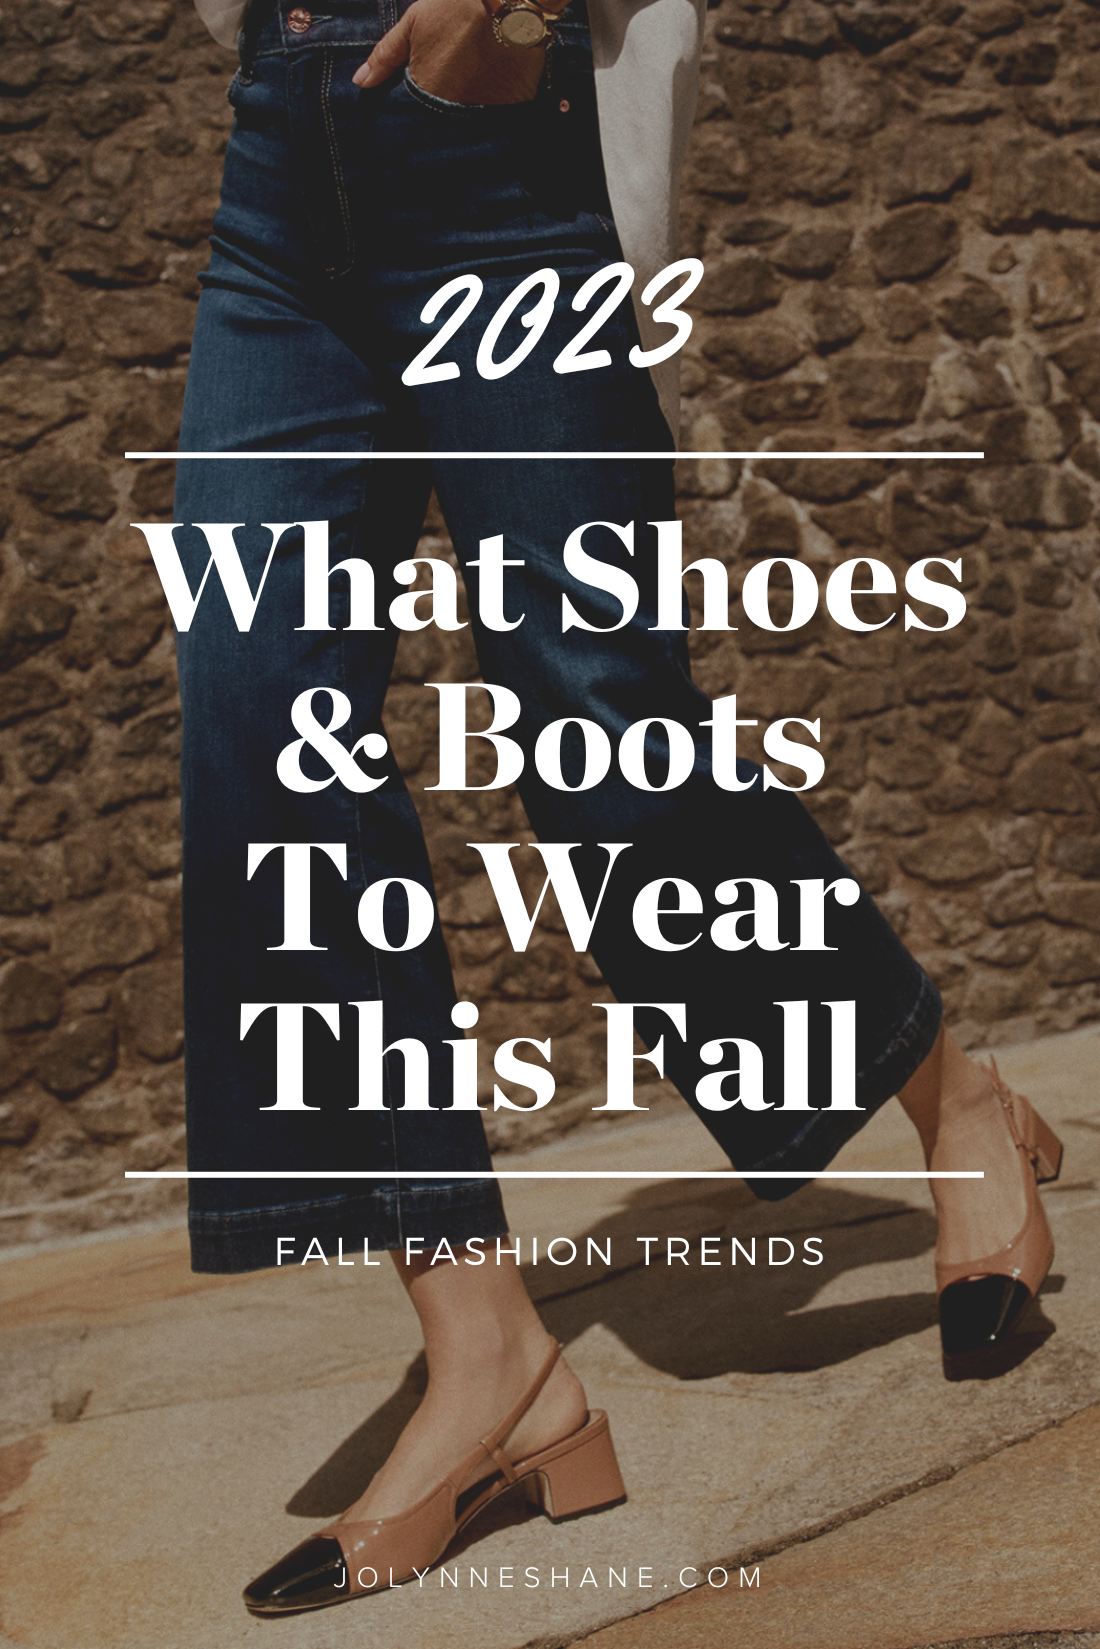 Fall 2023 Shoe Trends To Wear This Season